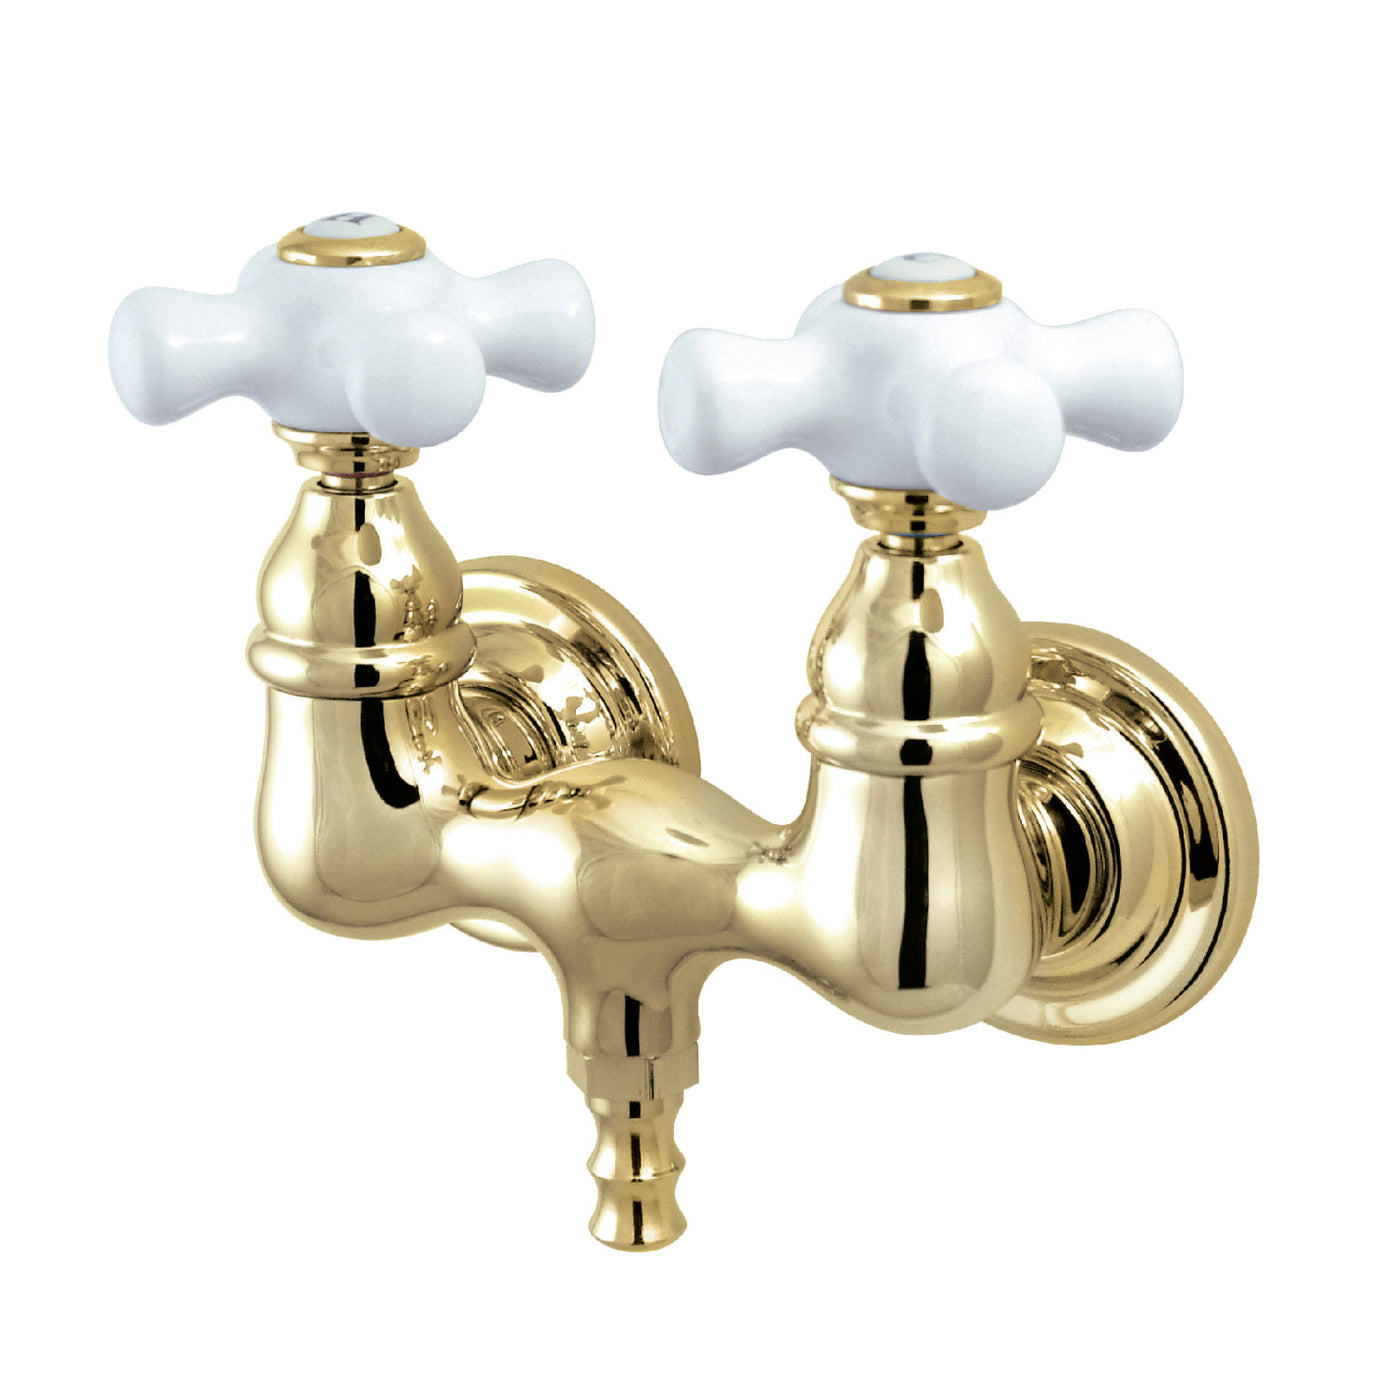 Elements of Design DT0312PX 3-3/8-Inch Wall Mount Tub Faucet, Polished Brass